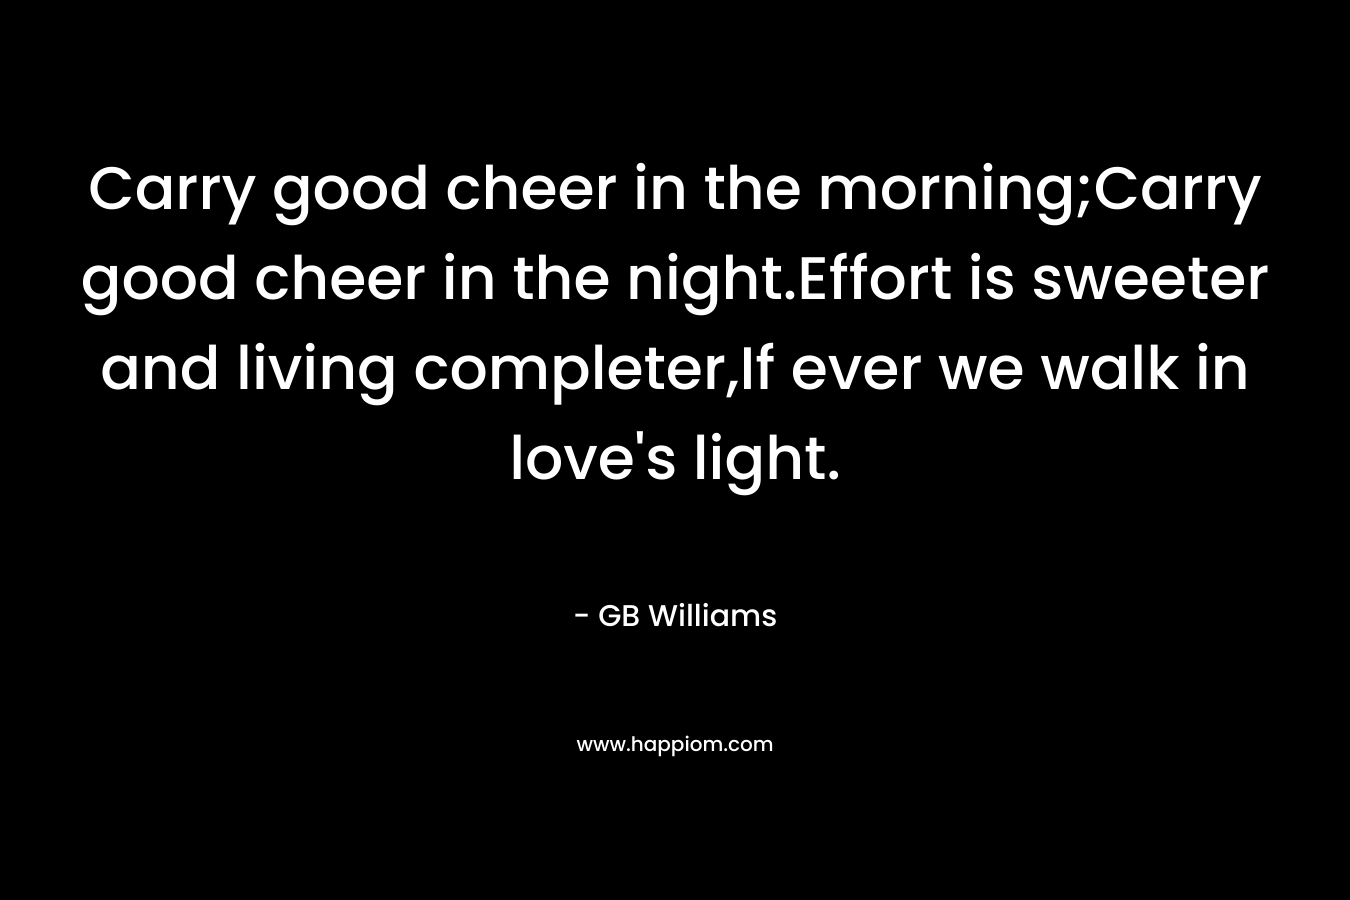 Carry good cheer in the morning;Carry good cheer in the night.Effort is sweeter and living completer,If ever we walk in love's light.